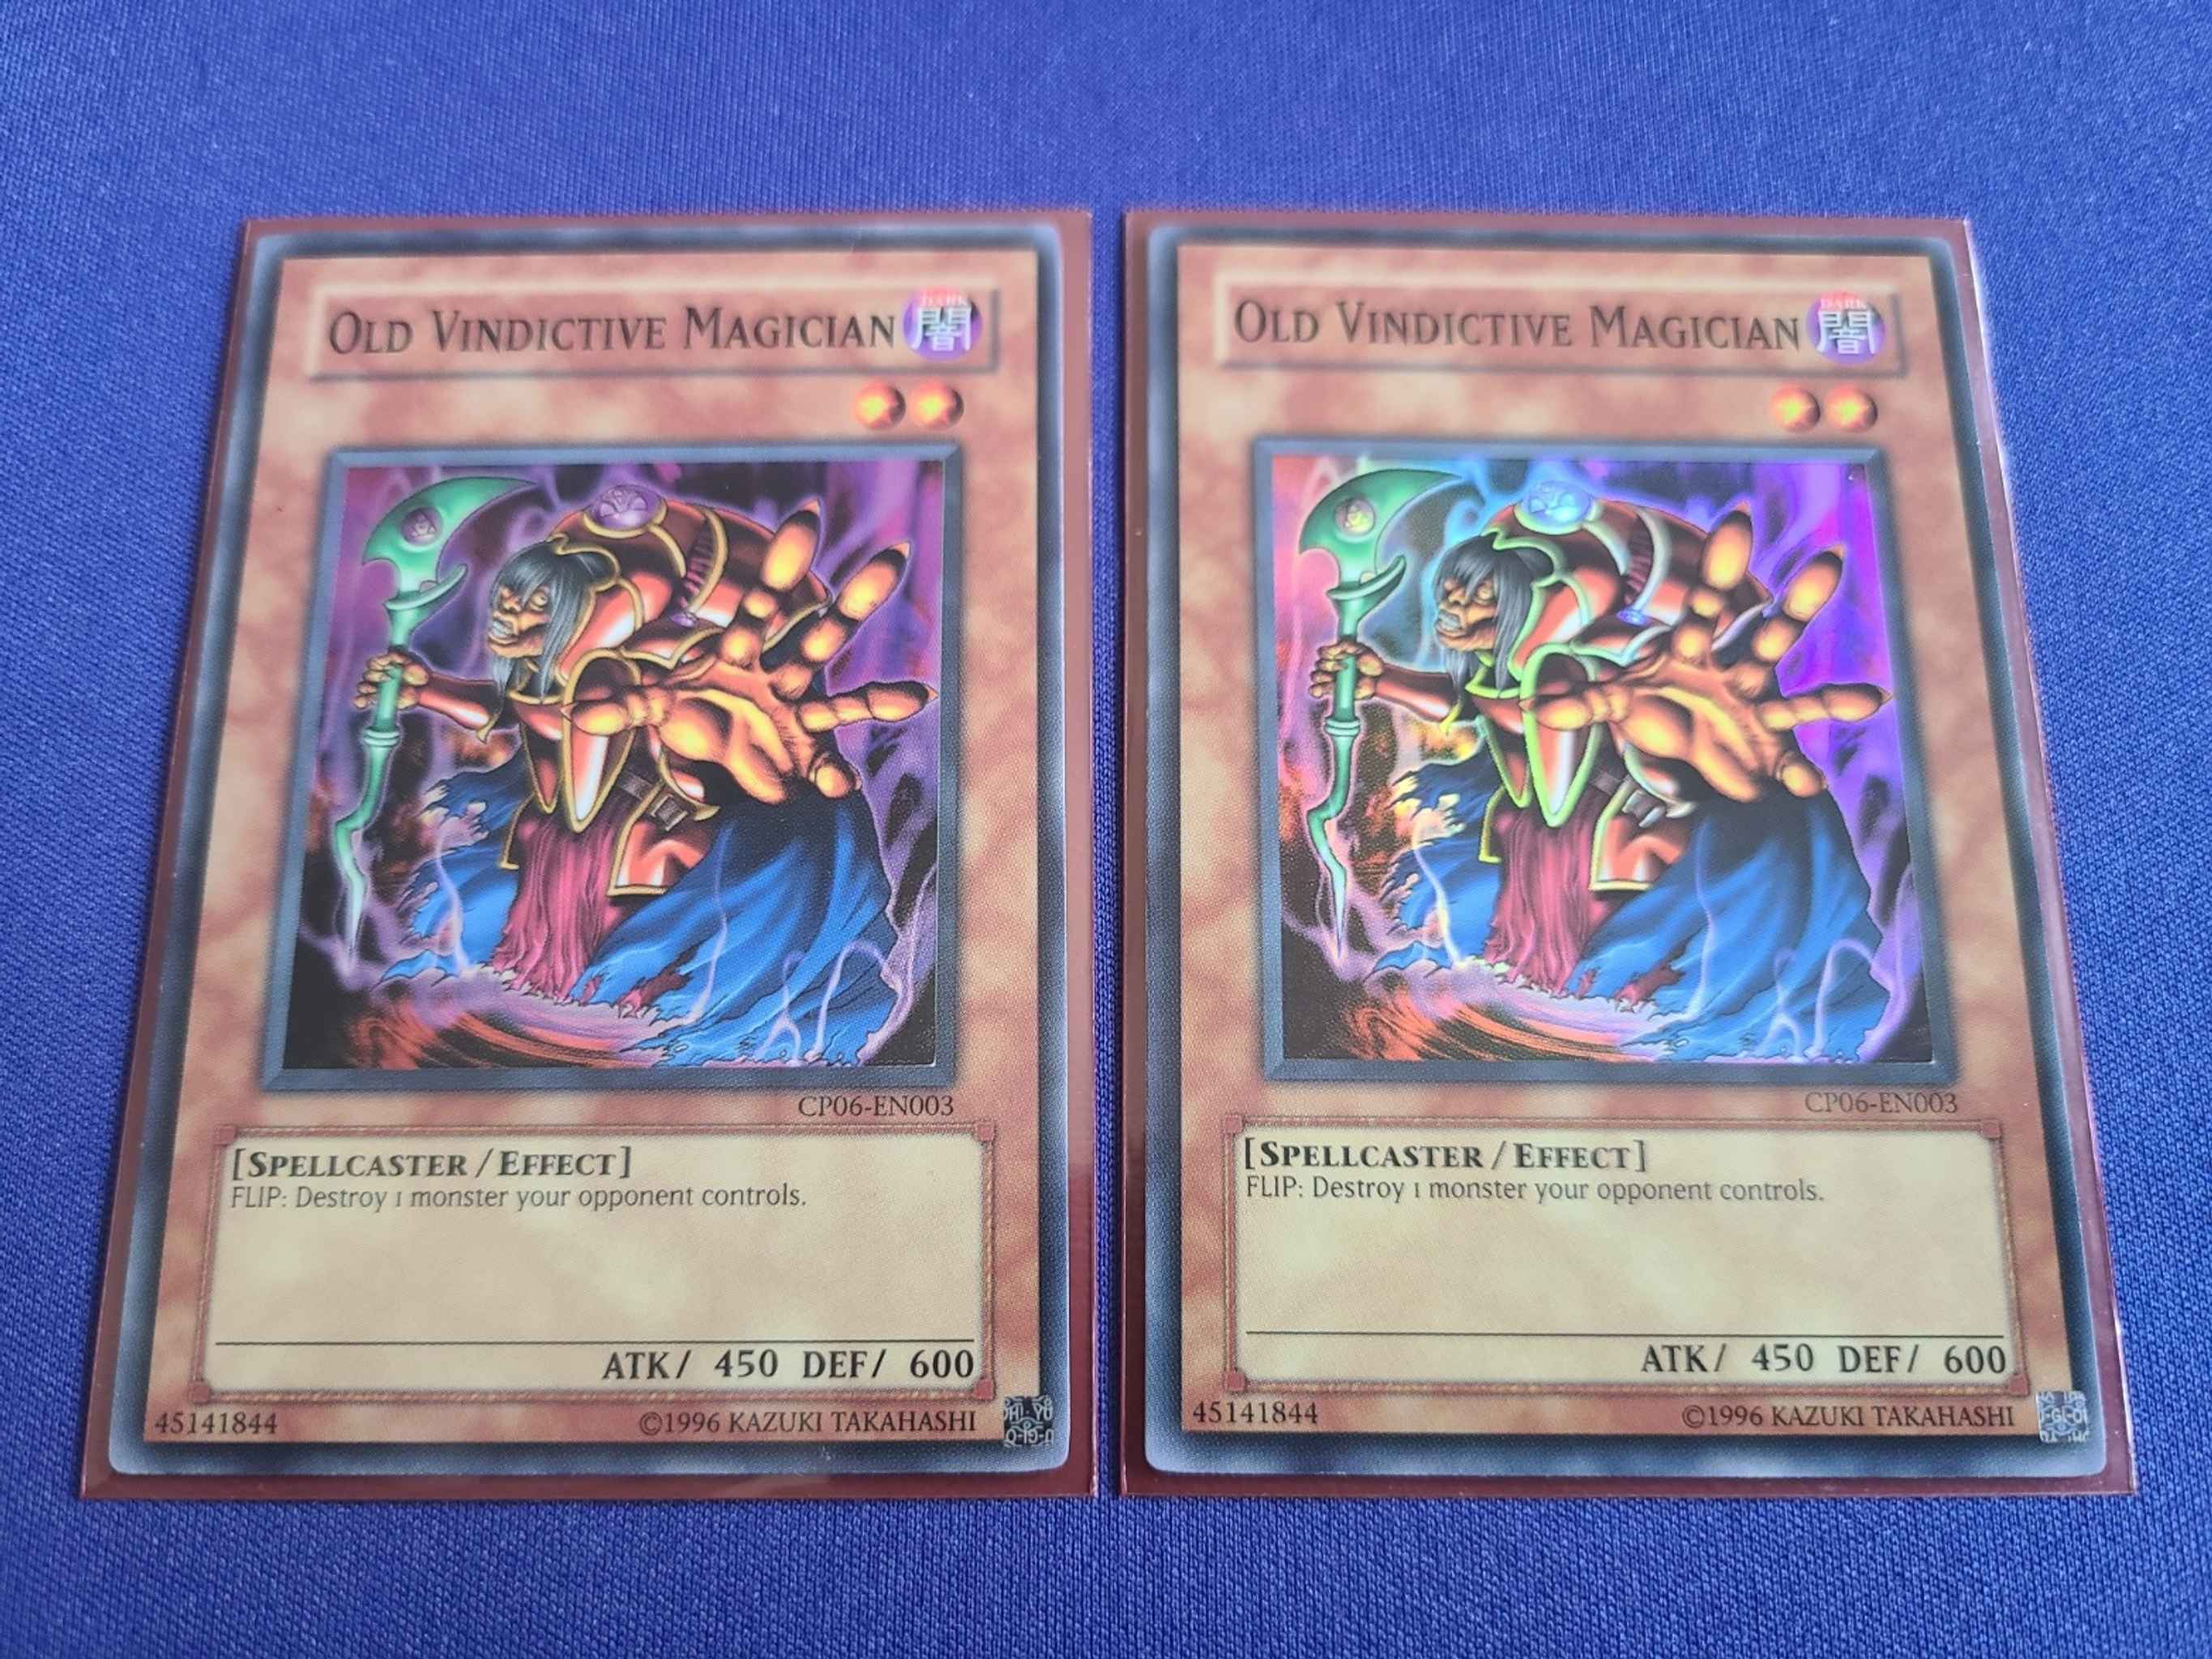 NM Old Vindictive Magician (CP06-EN003, 1 Copy Available) : Old 